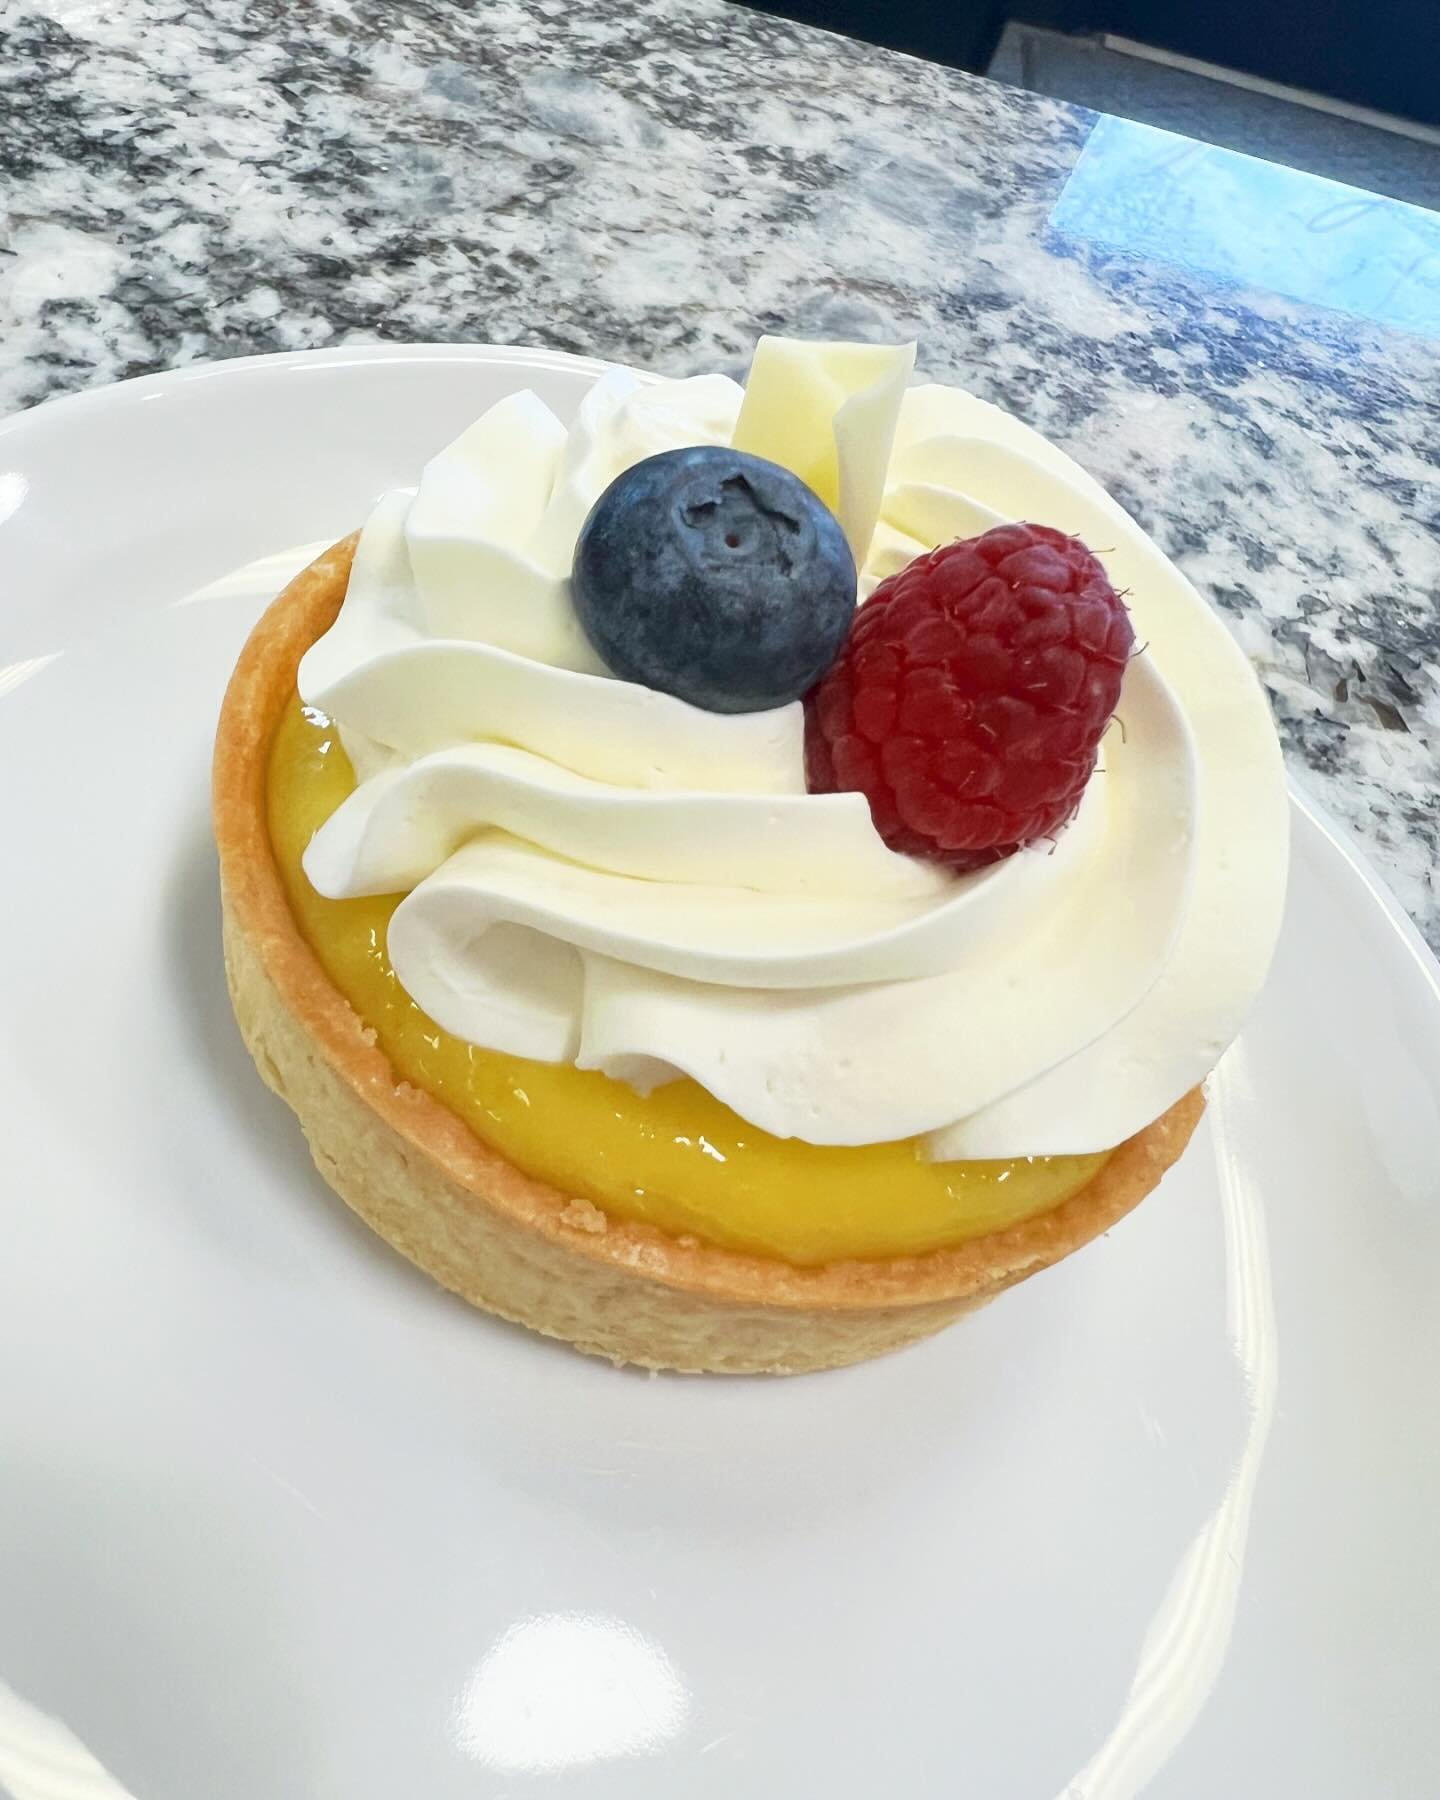 Have you tried this week&rsquo;s feature??? Our Lemon Berry Tarts are bursting with our house made lemon curd, whipped cream and fresh berries. So refreshing🍋

#lushcakesmn #mnbakery #mncakery #mncakeshop #cakery #cakeshop #lemontarts #fromscratch #